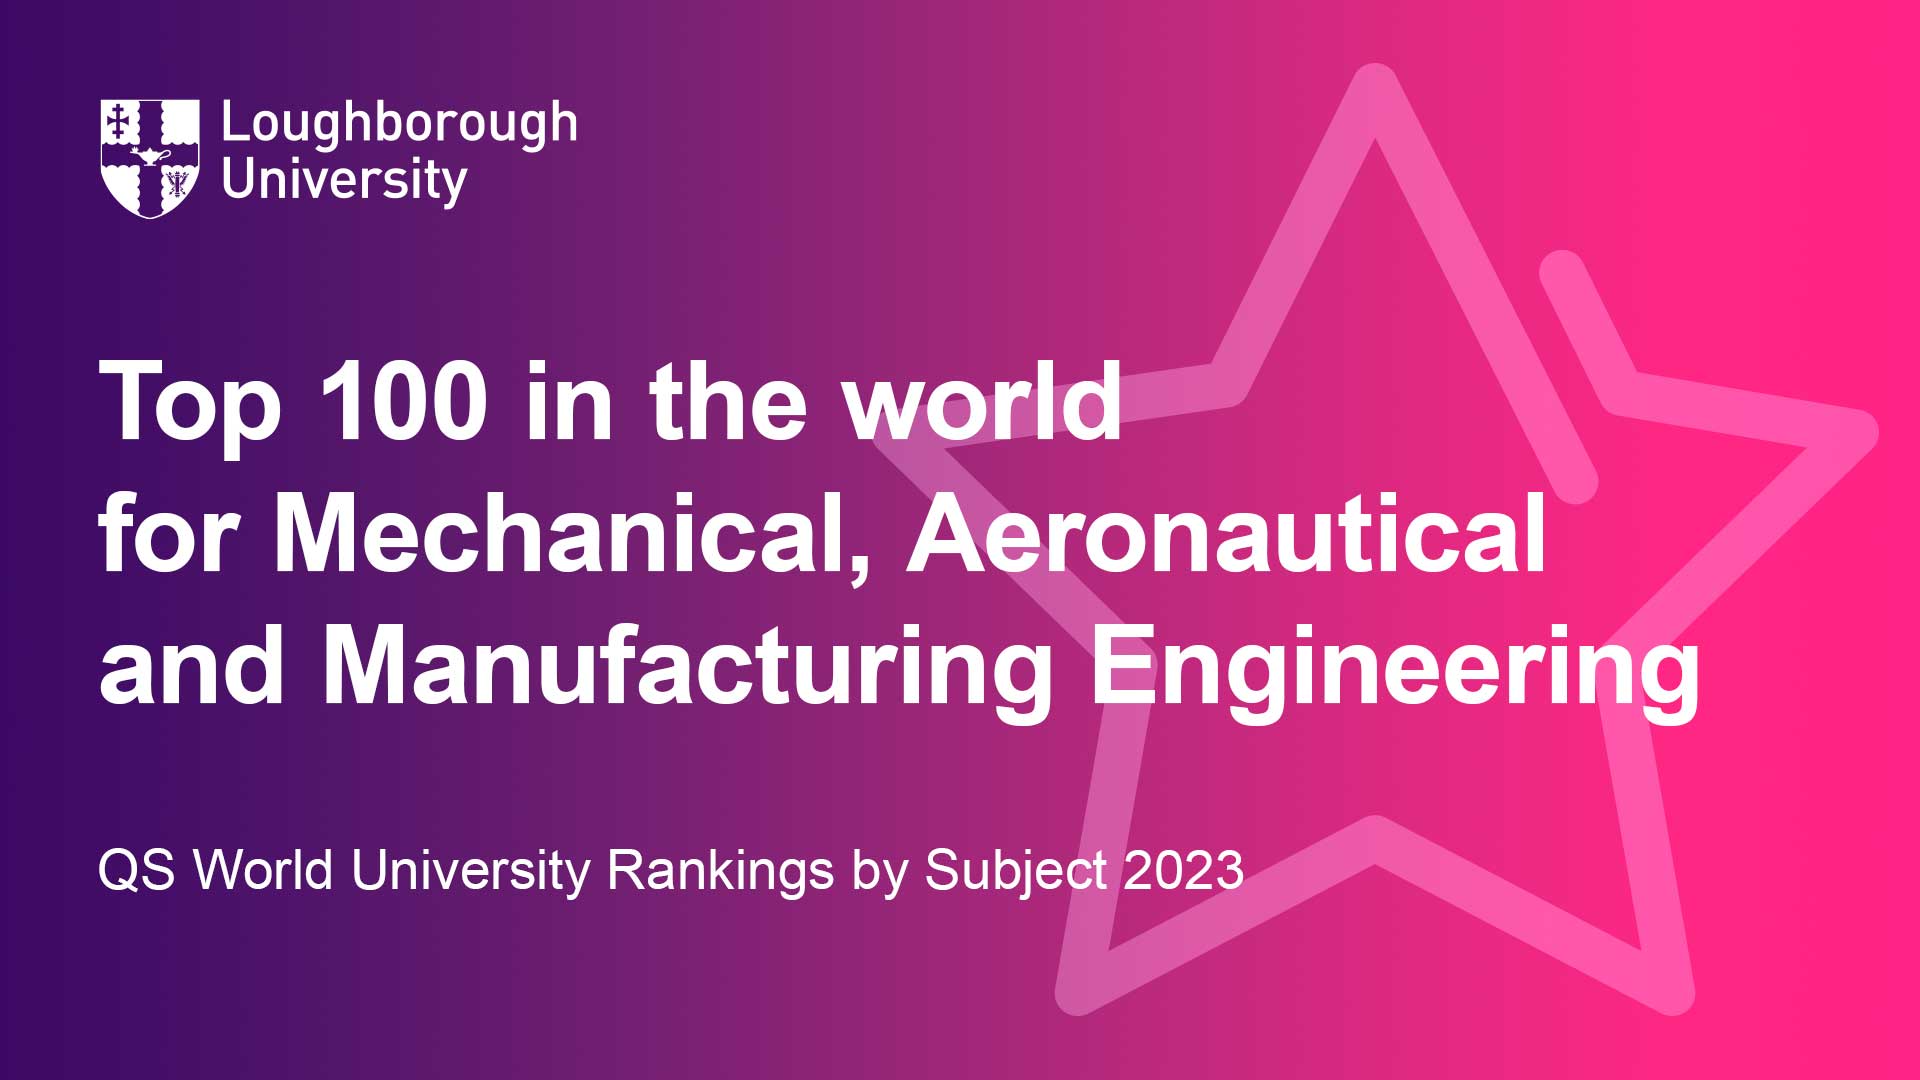 Infographic reading Top 100 in the world for Mechanical, Aeronautical and Manufacturing Engineering. QS World University Rankings by Subject 2023.